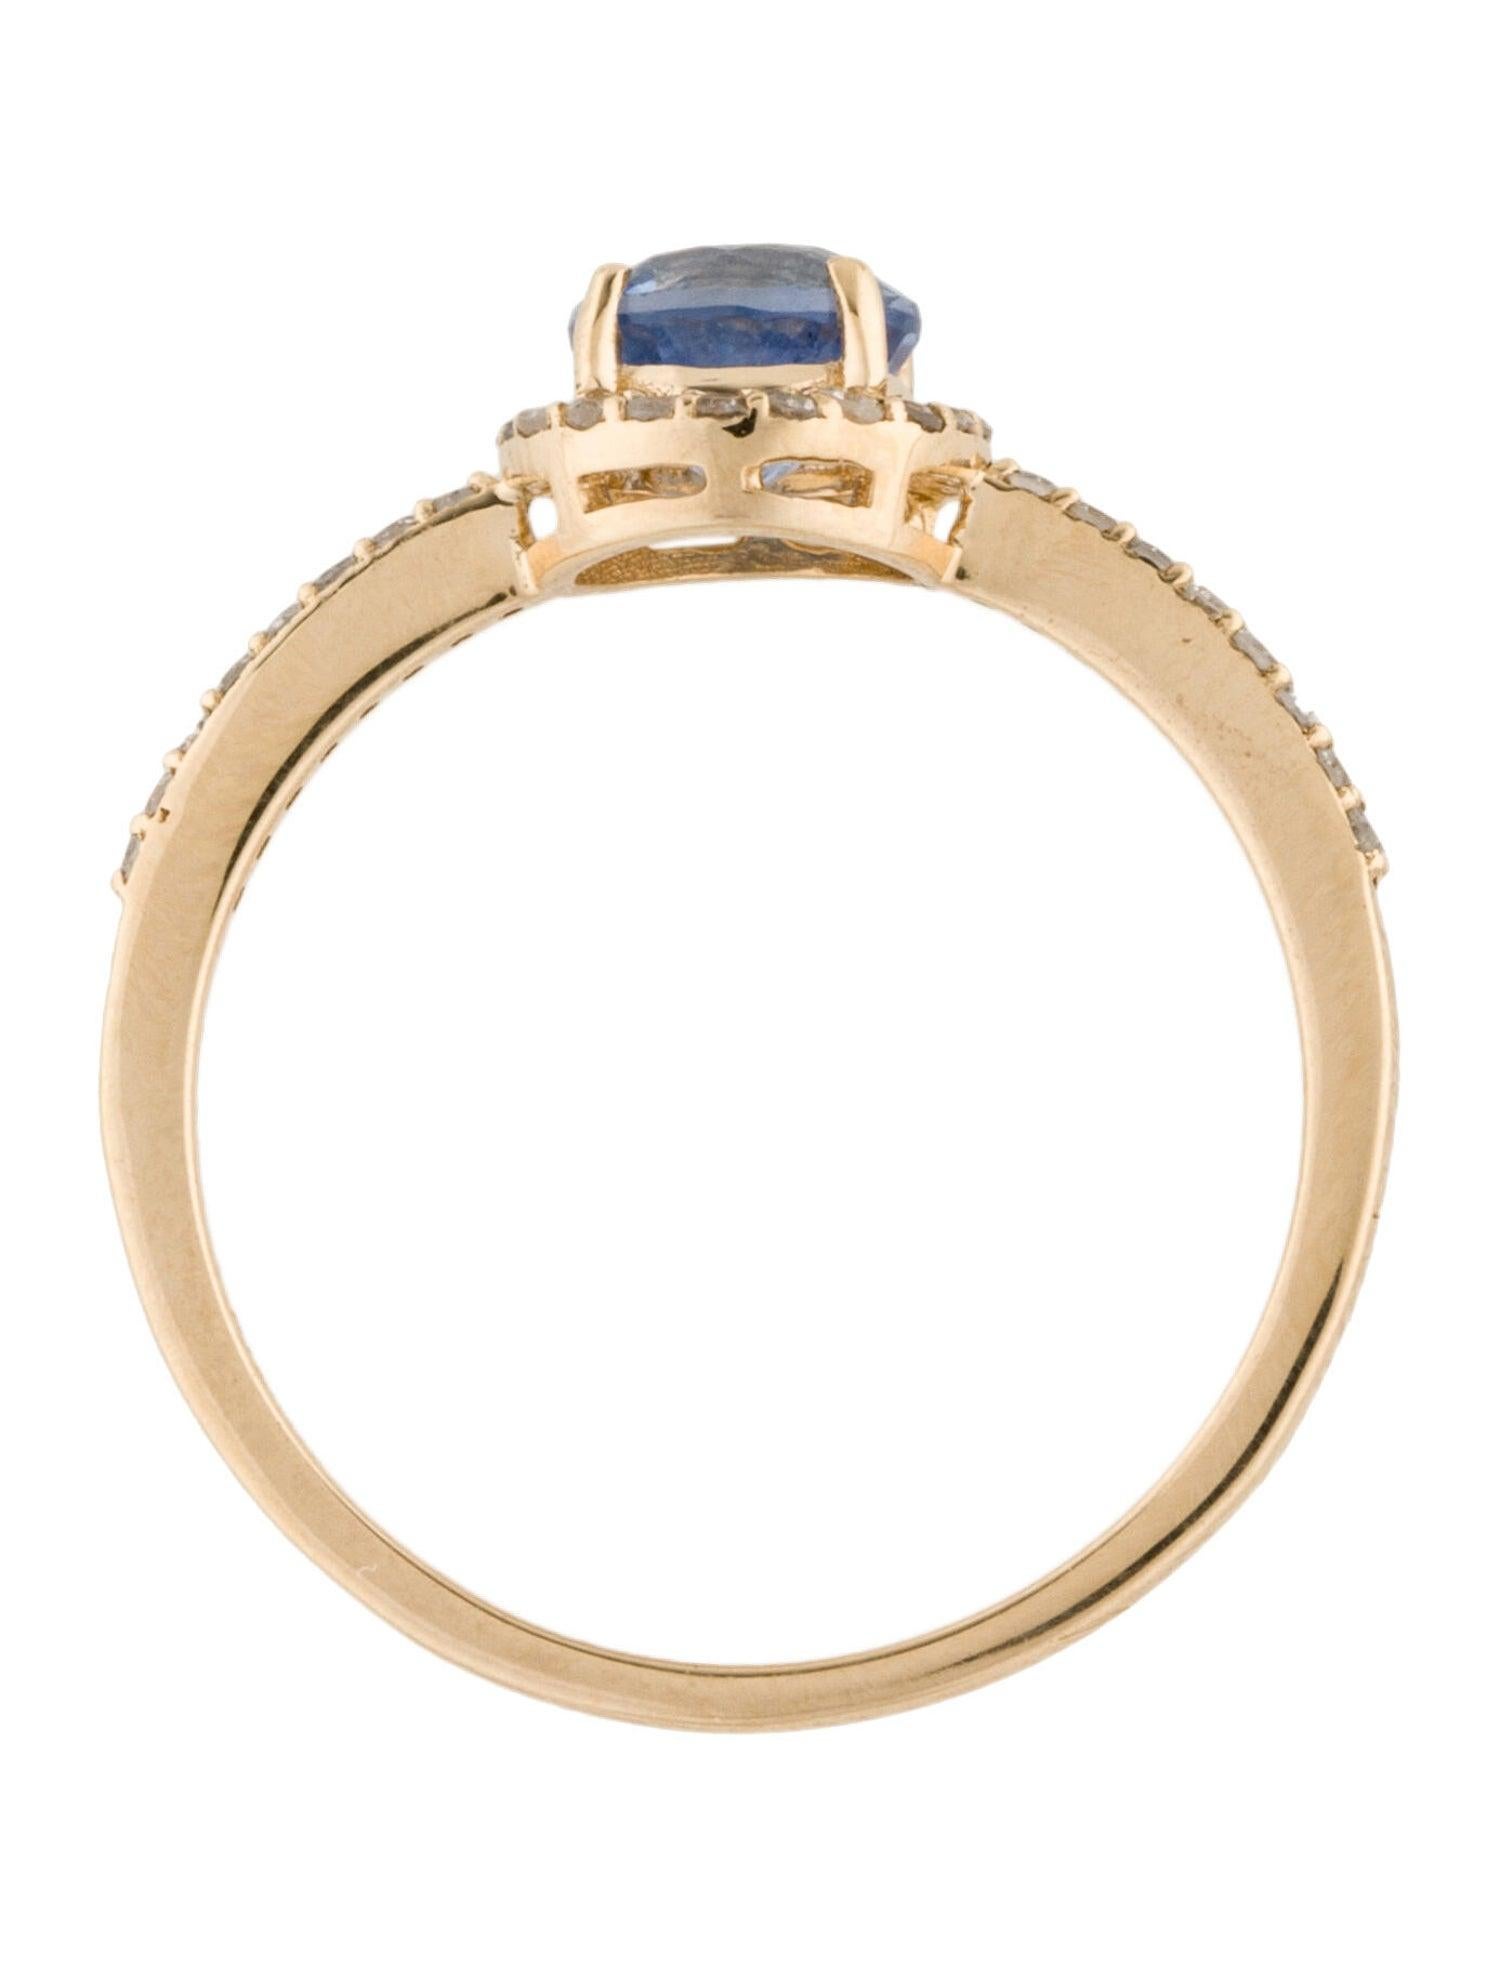 14K Sapphire & Diamond Cocktail Ring - Size 6.75 - Elegant Statement Jewelry In New Condition For Sale In Holtsville, NY